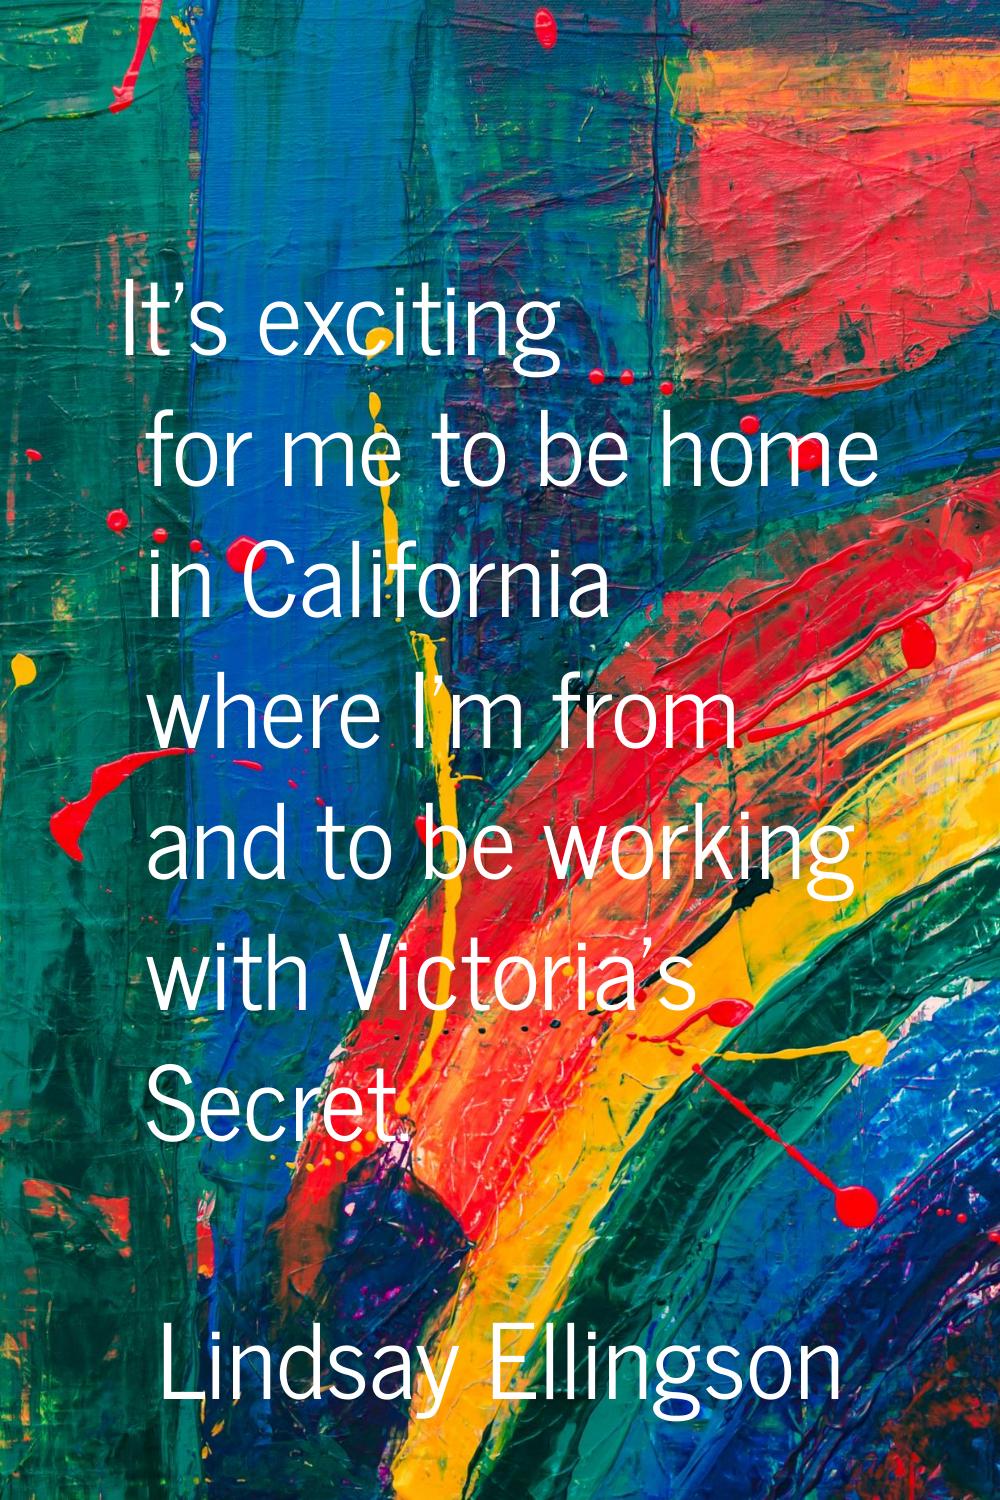 It's exciting for me to be home in California where I'm from and to be working with Victoria's Secr